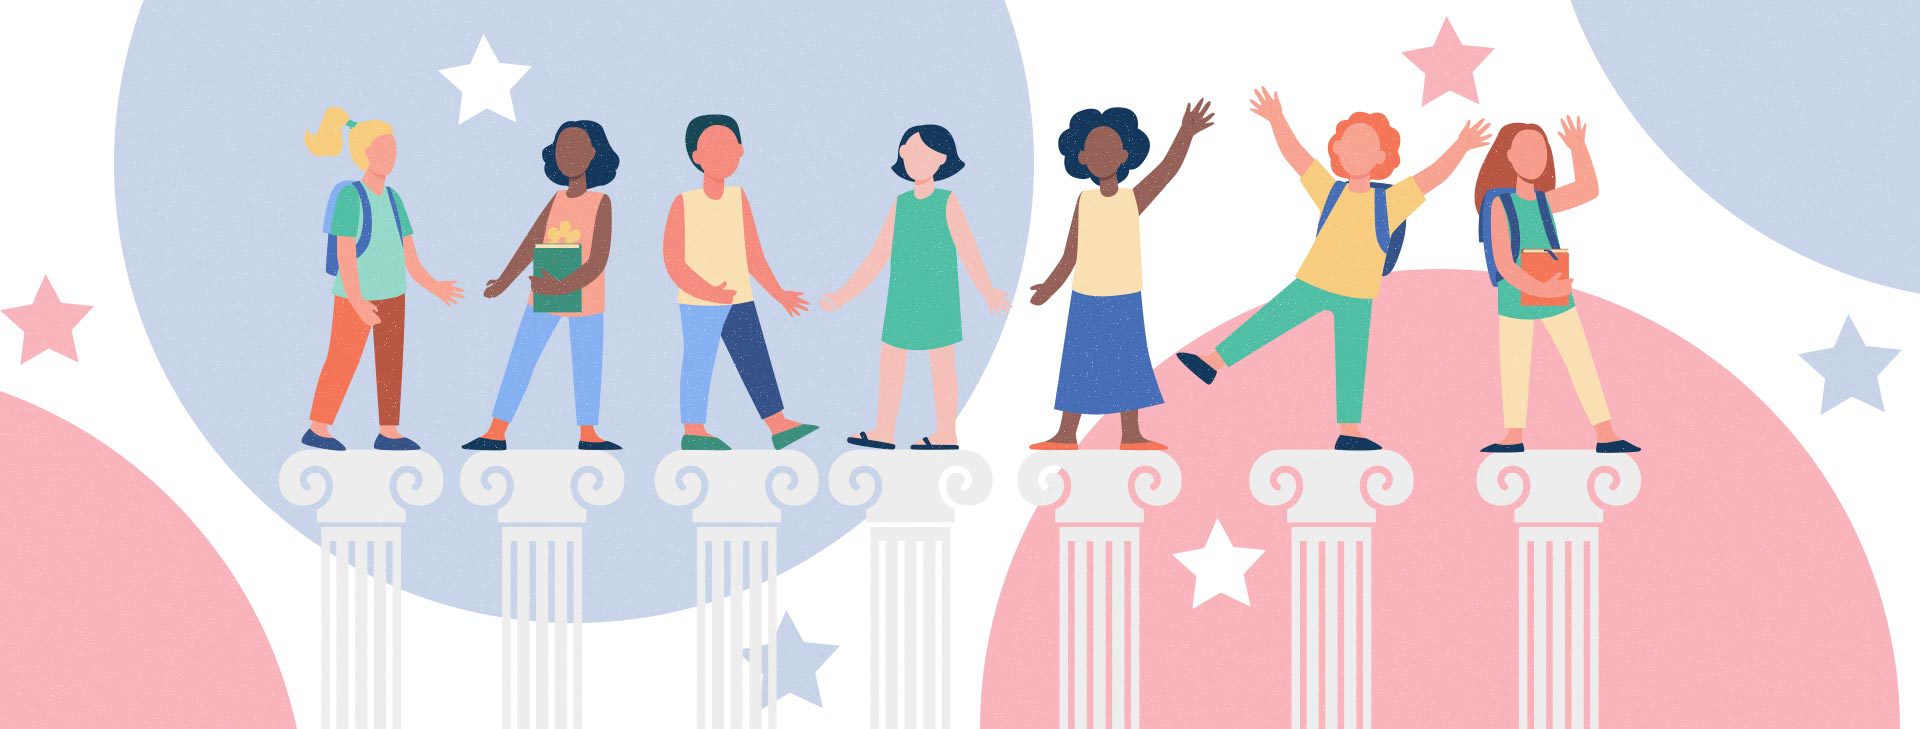 There are 7 white pillars that go about halfway up the image, and there are 7 different children of diverse backgrounds standing on each pillar to represent the challenges of equity in education under standardized accountability designs.